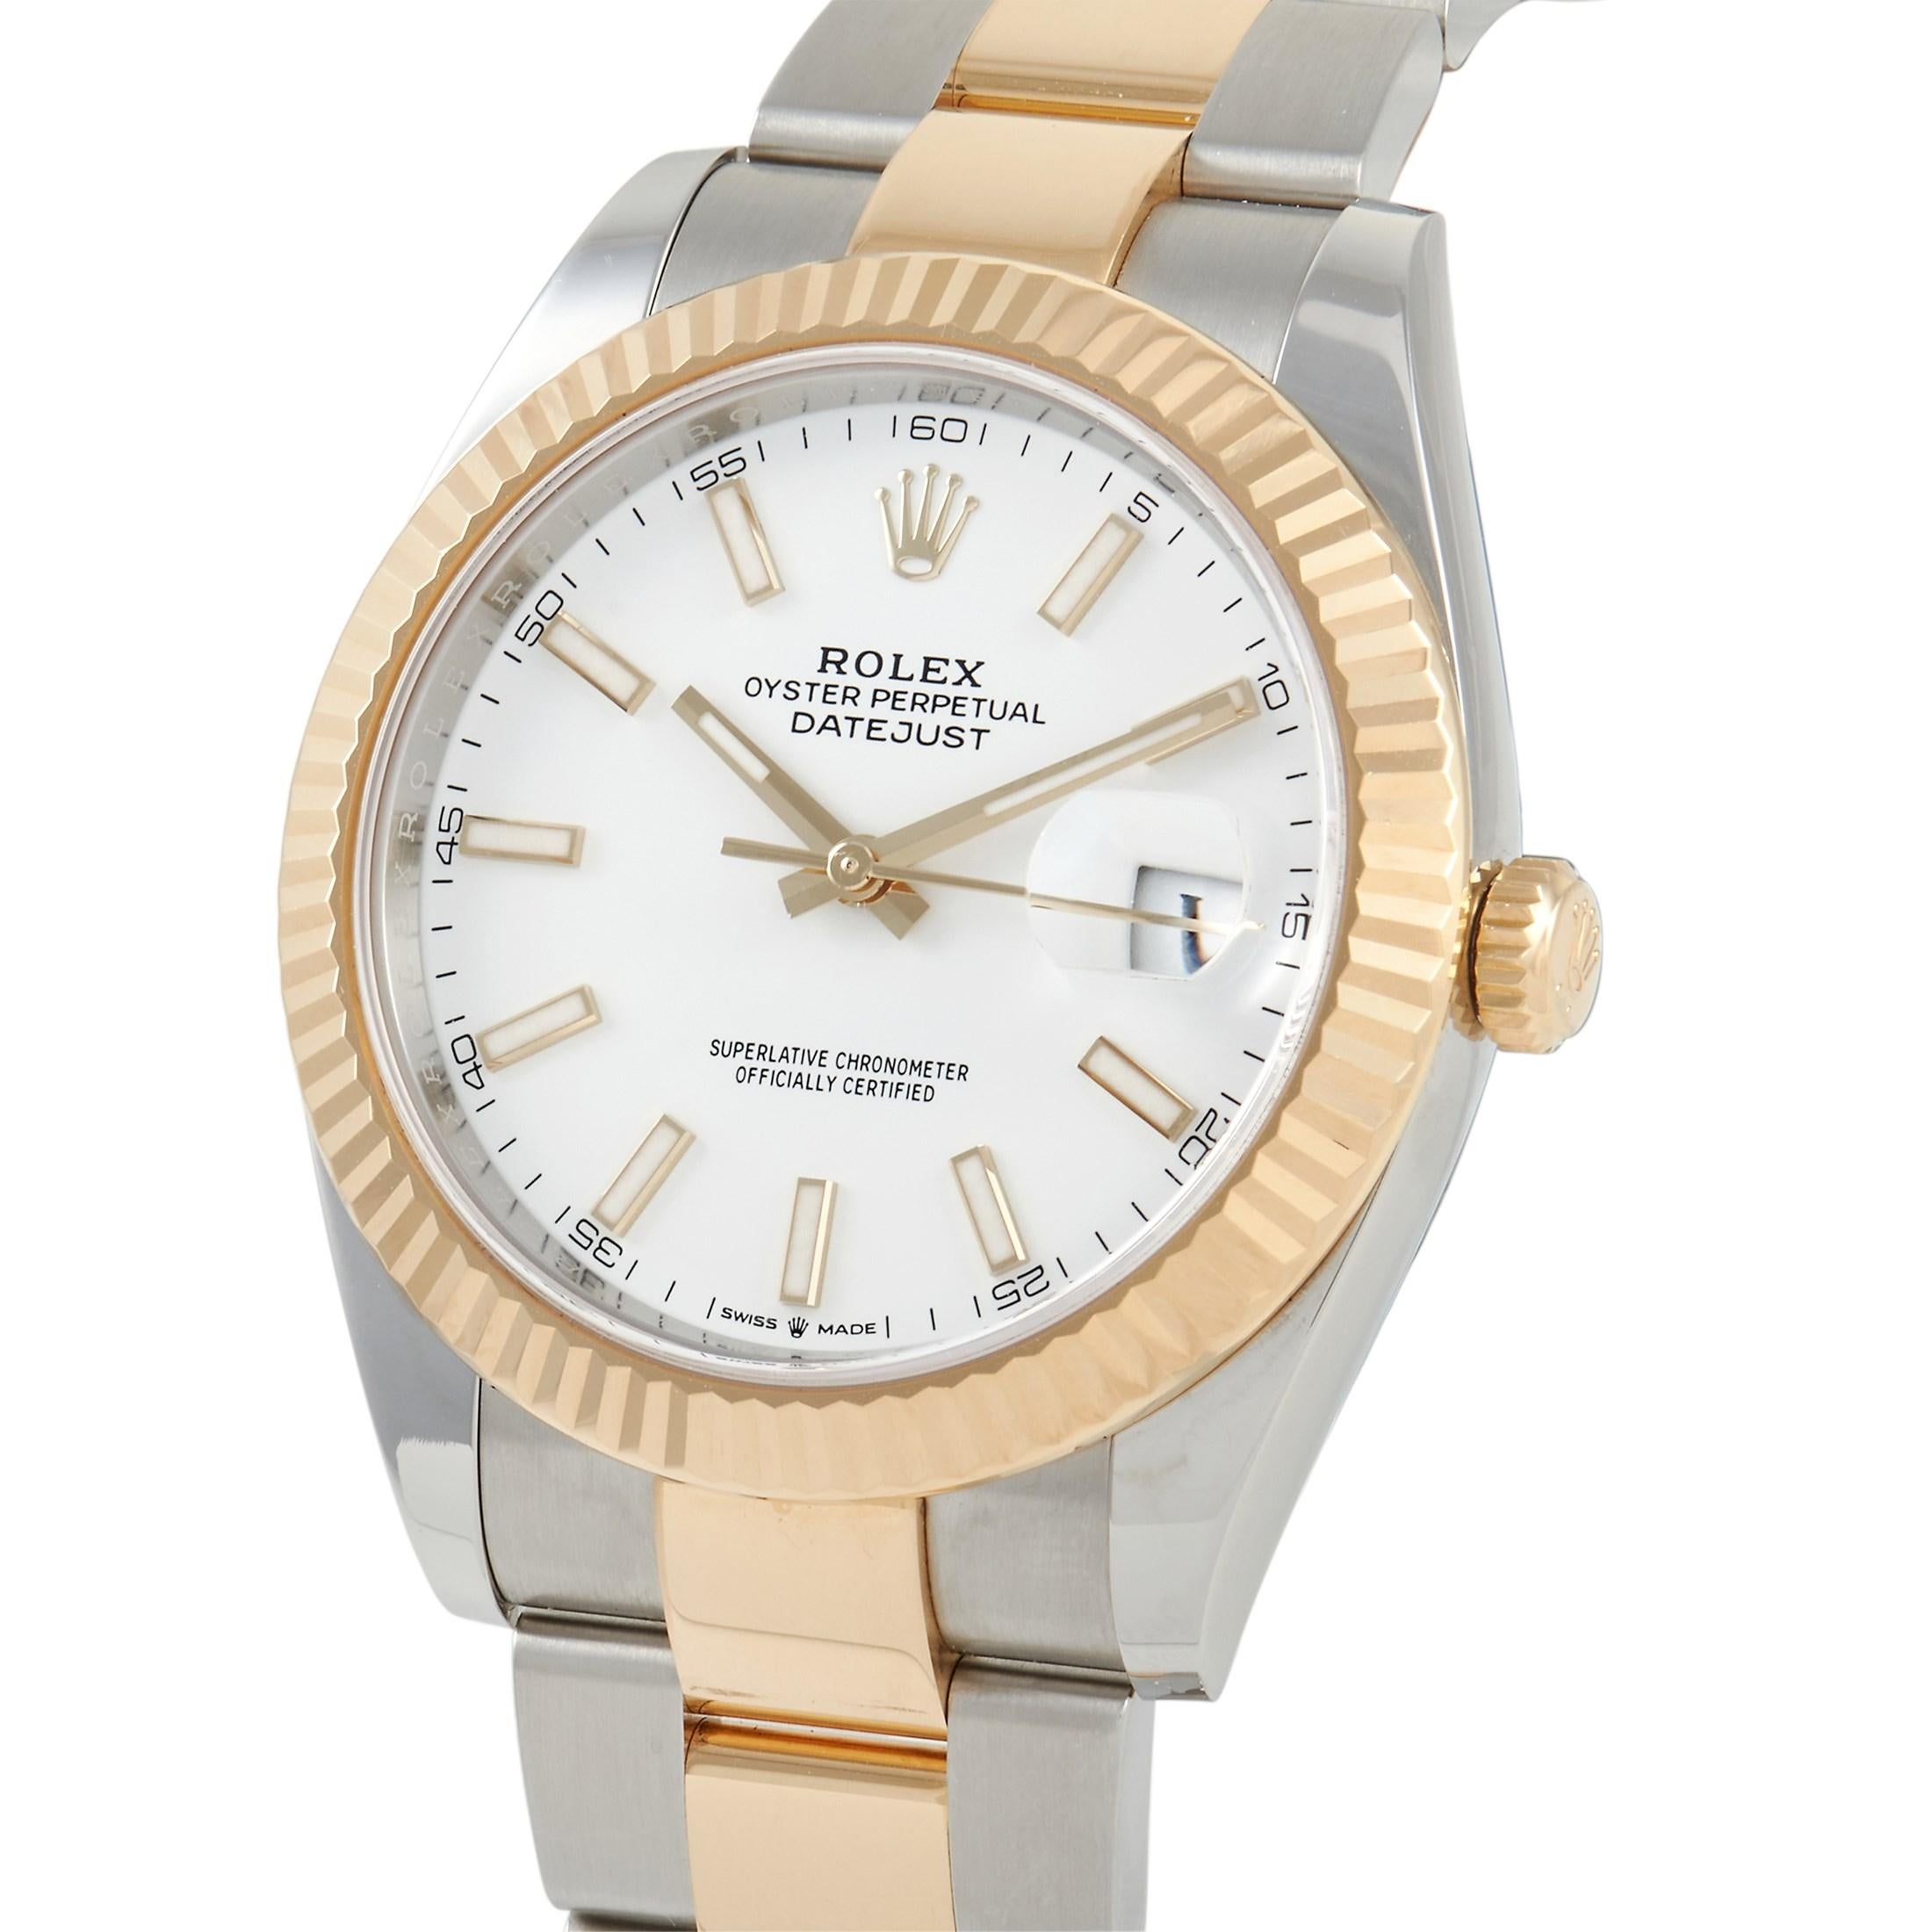 The Rolex Oyster Perpetual Datejust Watch, reference number 126333, possesses a crisp sense of sophistication. 

A Stainless Steel case measuring 41mm is elegantly accented by this watch’s fluted bezel, which is crafted from 18K Yellow Gold. On the